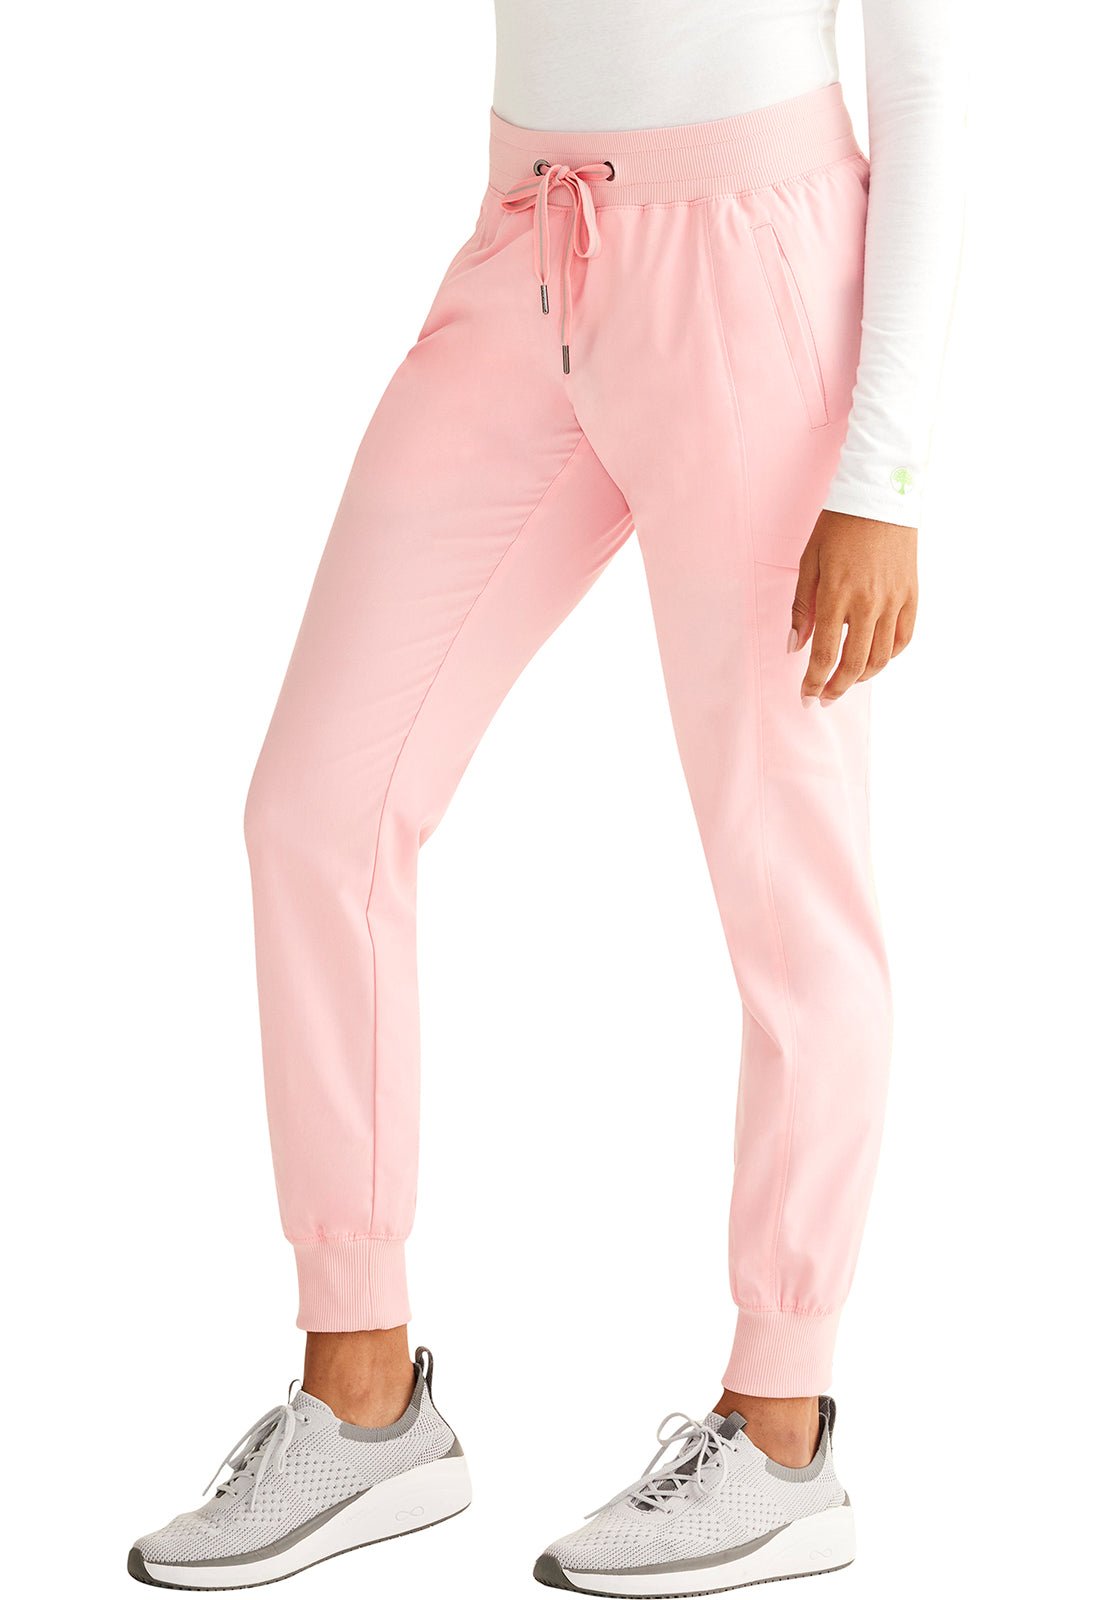 Healing Hands Toby Jogger Pant 9244 in Dried Rose, Pink Popsicle, Soft Clay